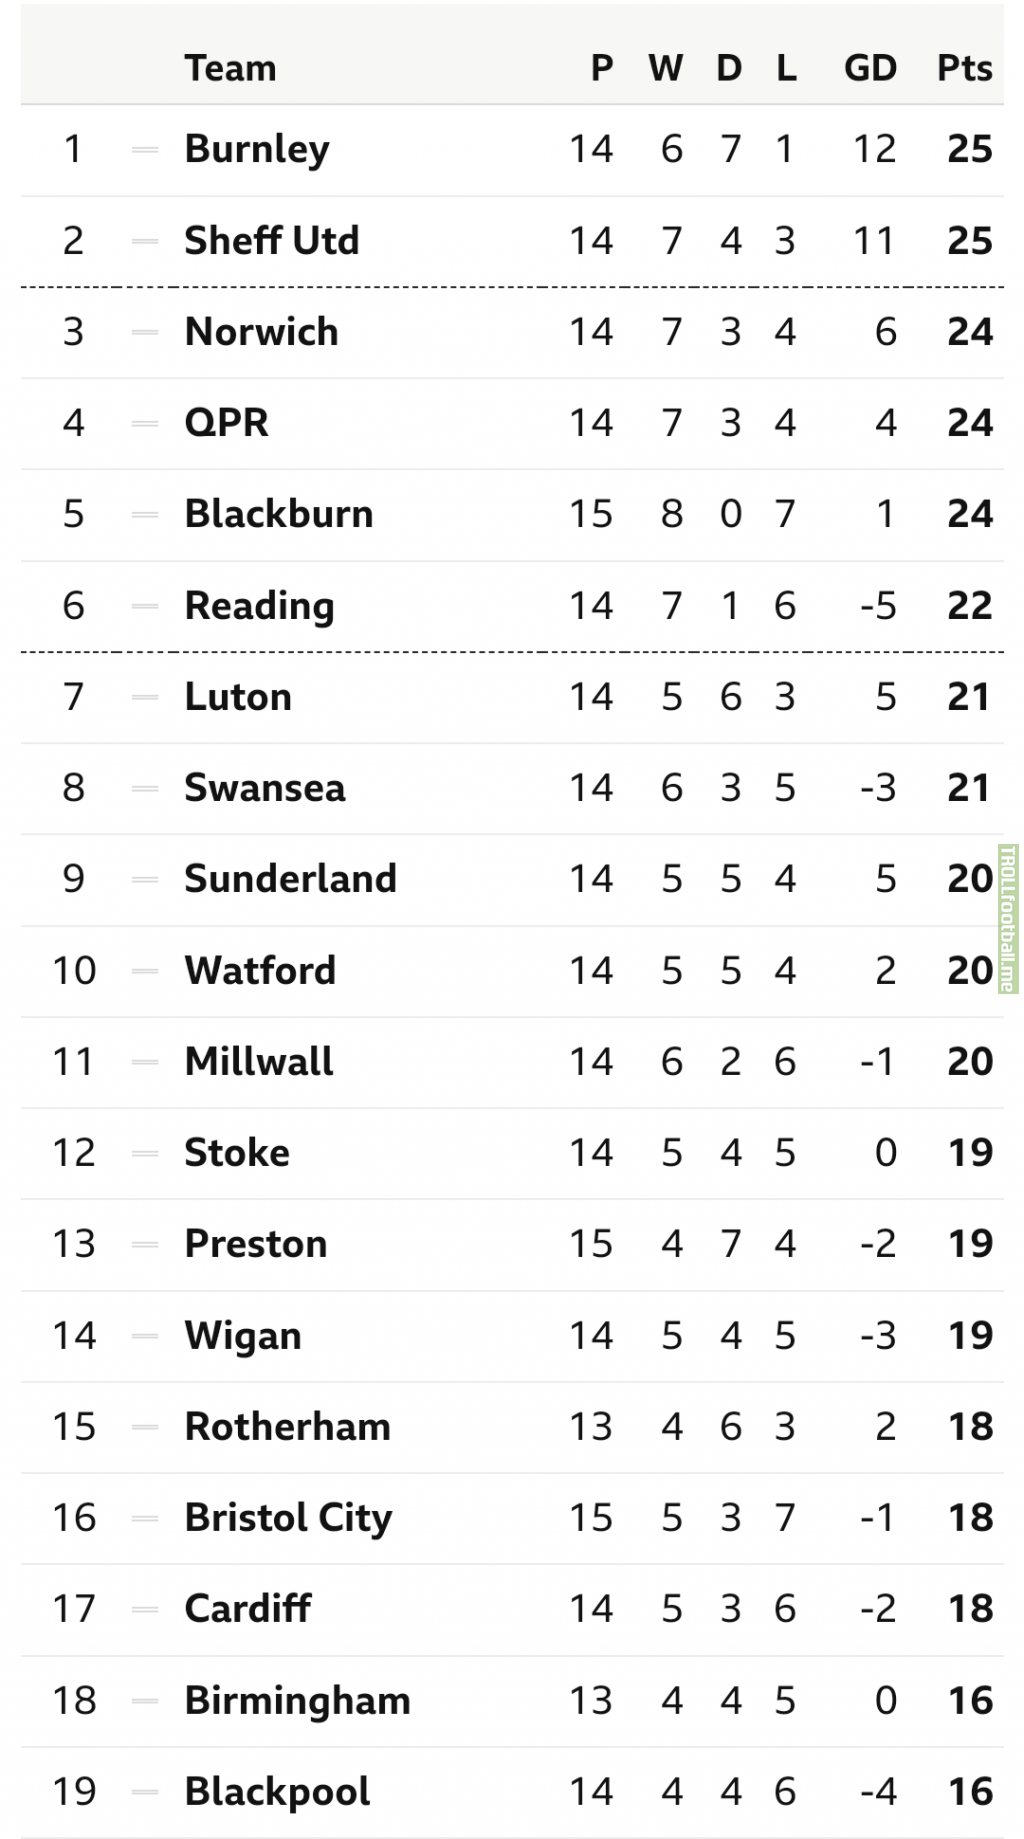 Burnley are currently top of the Championship despite only winning 6 of their 14 games